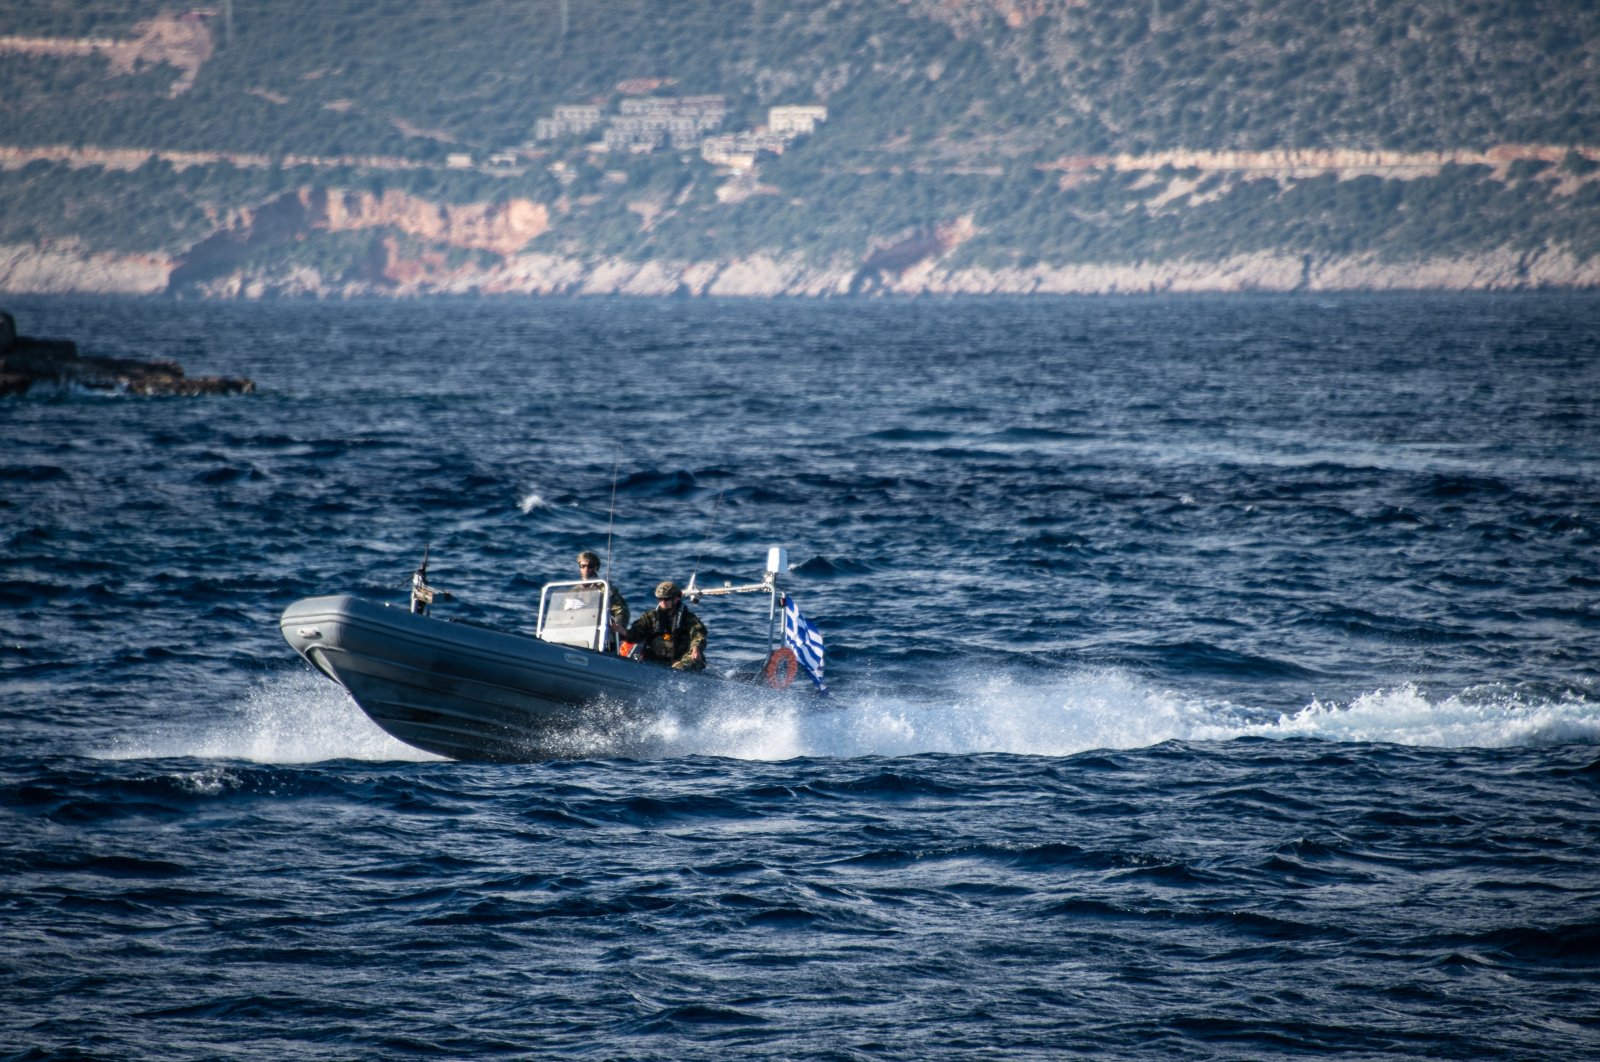 Greek naval forces conducted routine patrol missions around the Mediterranean island of Kastellorizo, one of the easternmost islands in Greece, which is just 3 kilometers (1.8 miles) from the southern coast of Kaş, Türkiye, Dec. 30, 2022. (Reuters Photo)